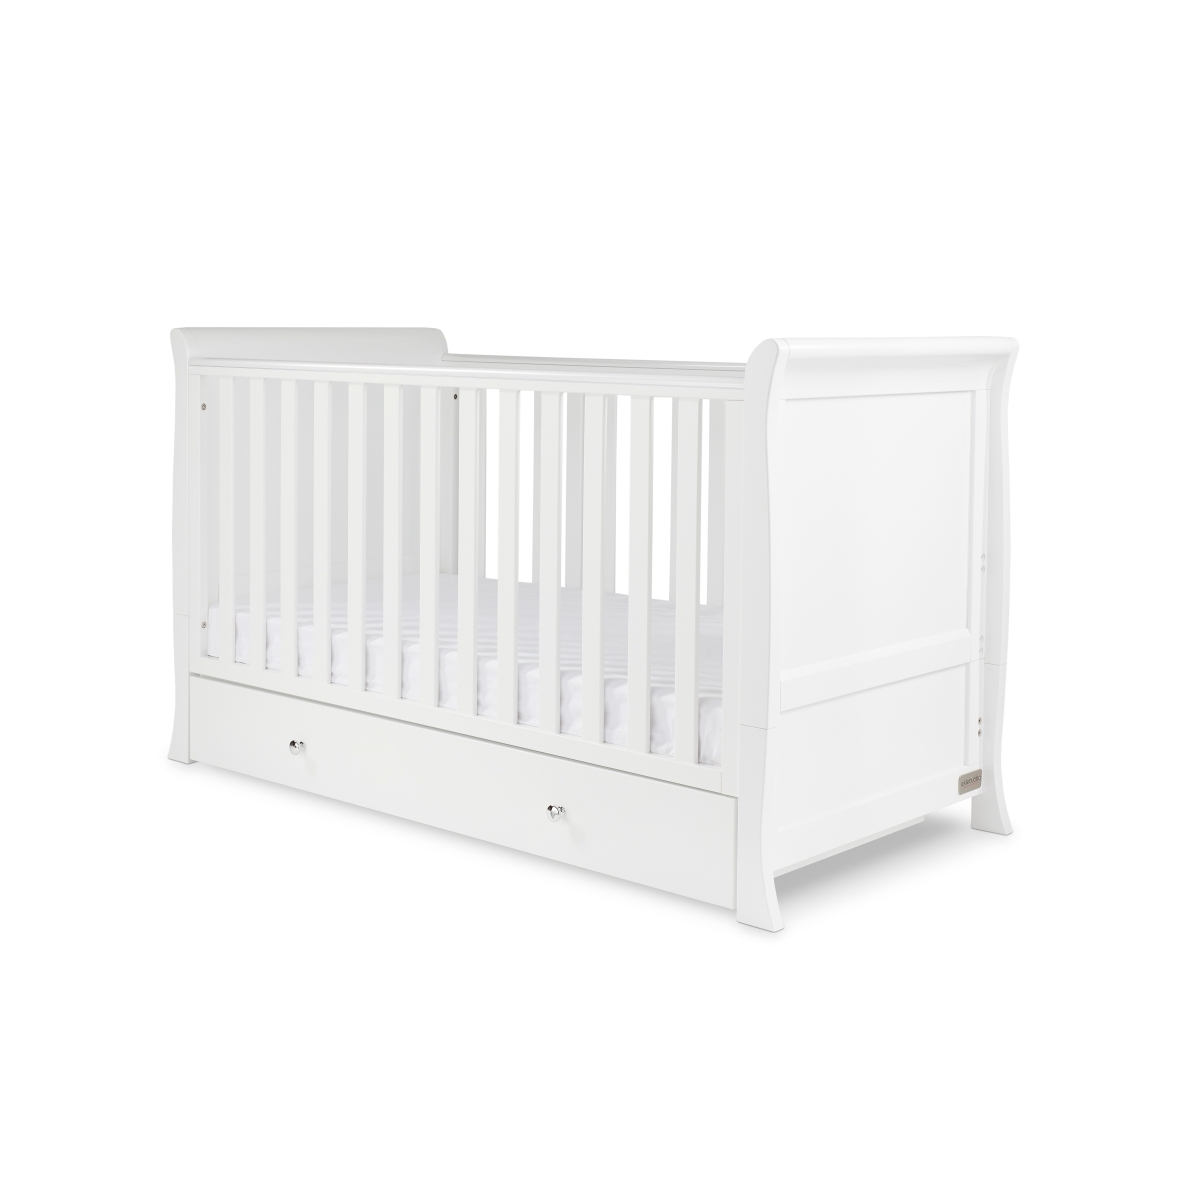 Snowdon Classic Cot Bed and Finest Mattress